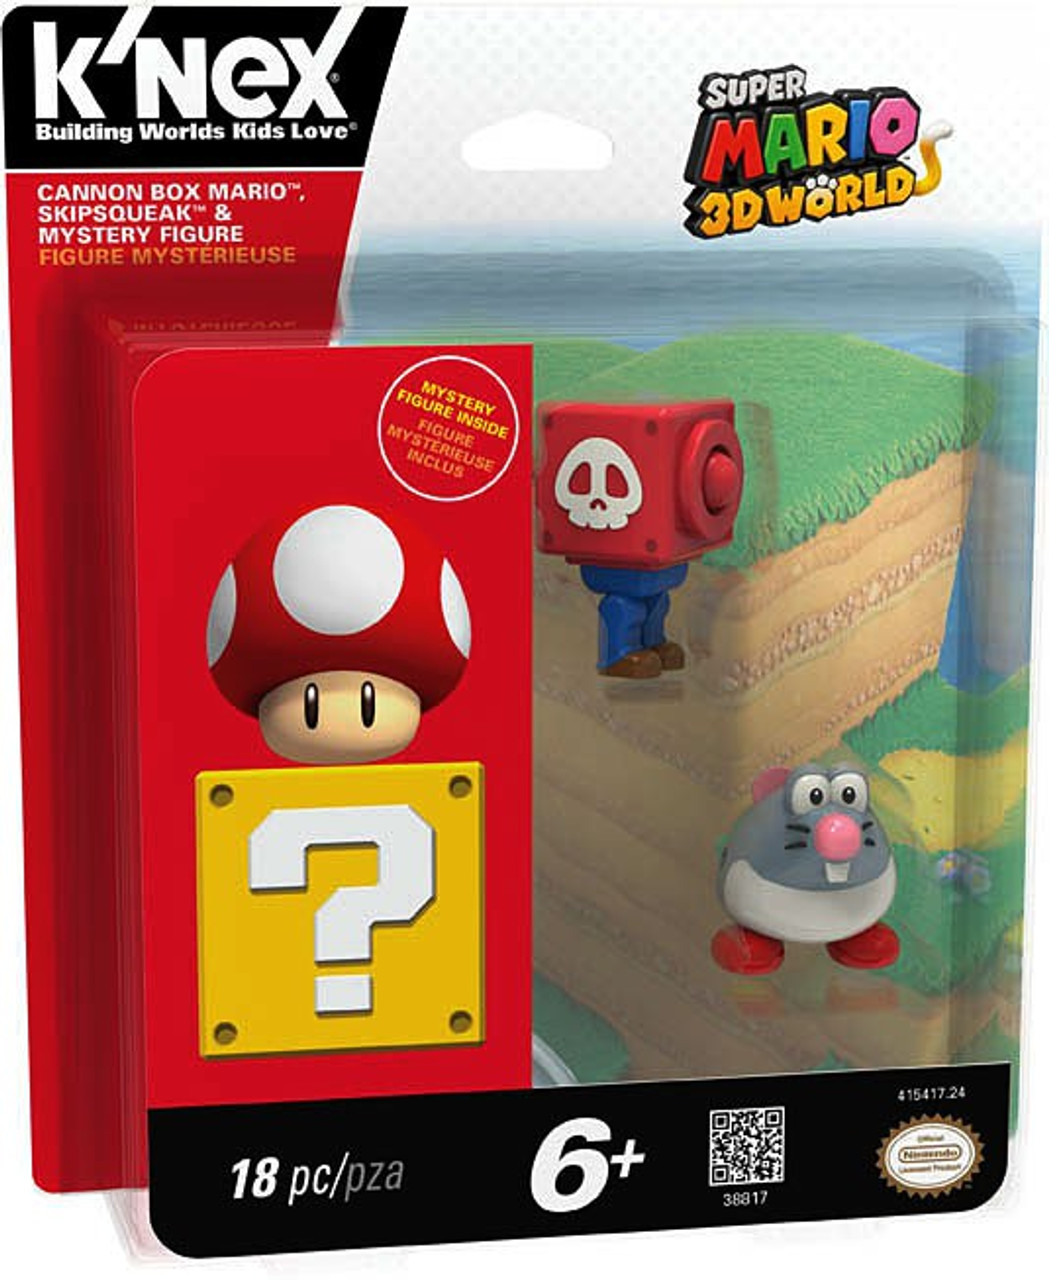 Knex Super Mario 3d Land Cannon Box Mario Skipsqueak Mystery Figure 3 Pack Toywiz - roblox super mario 3d roleplay